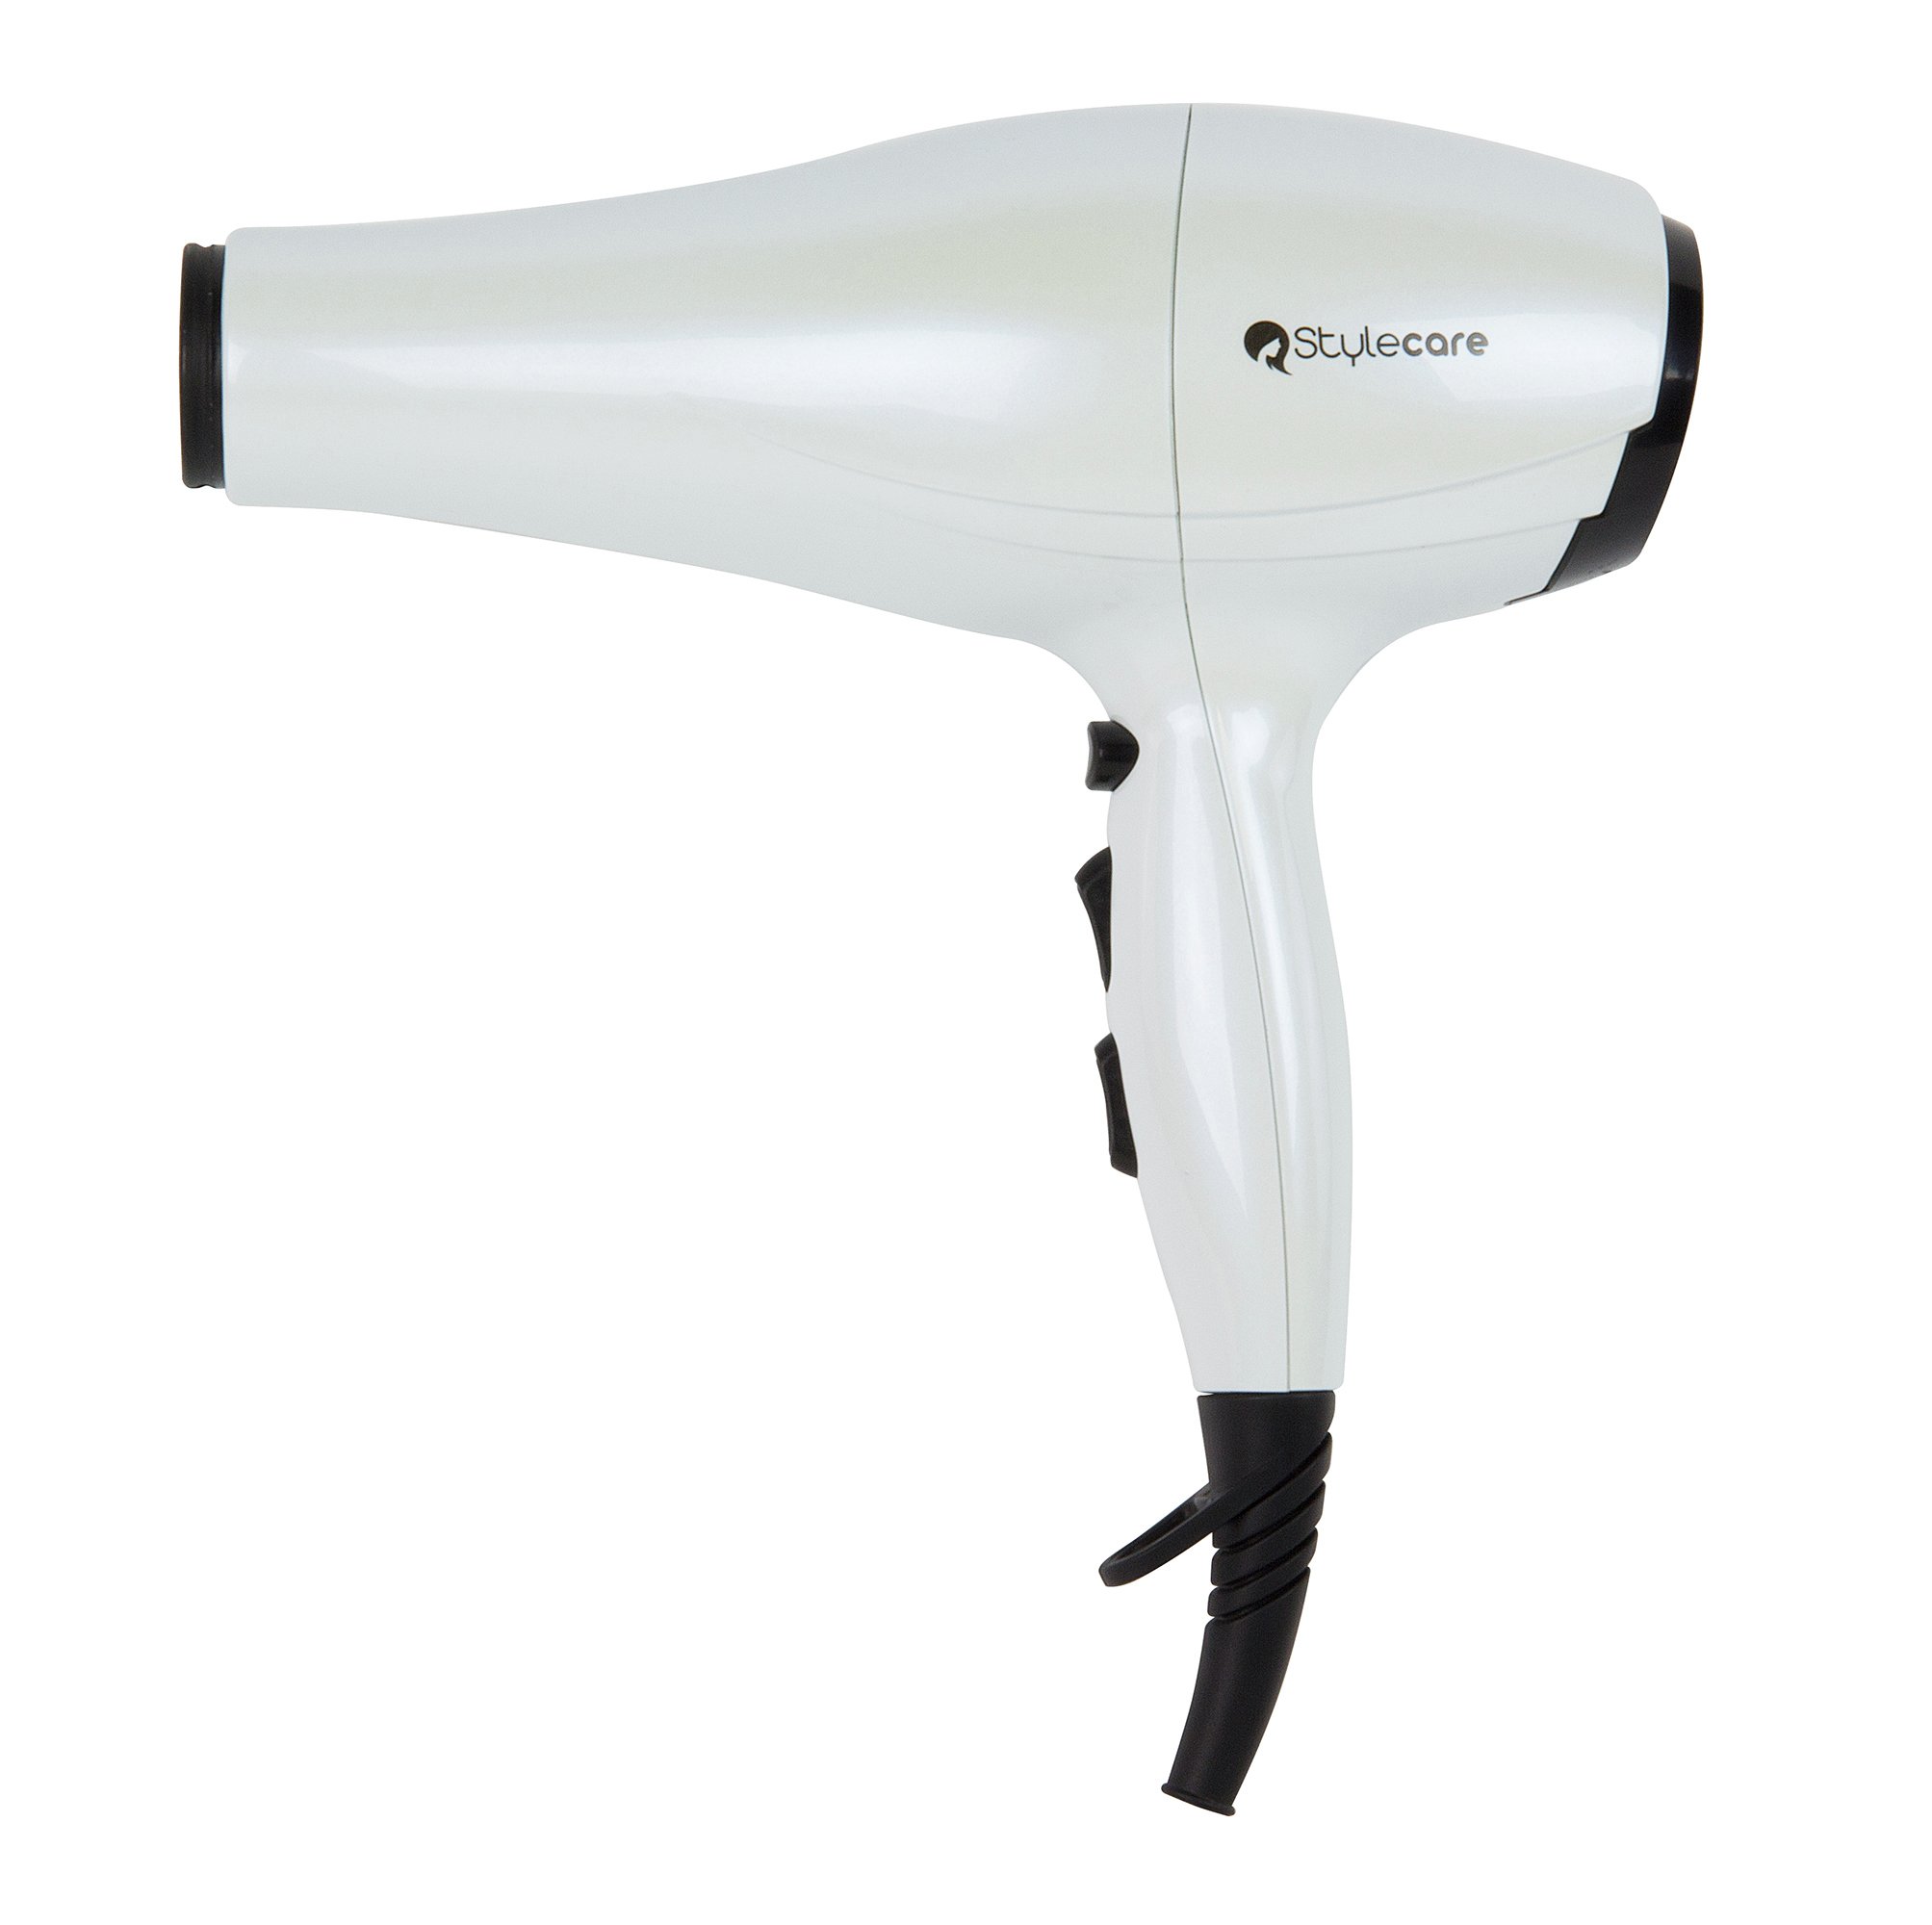 Stylecare - 2400W Ionic AC - Hair Dryer with Diffuser Review